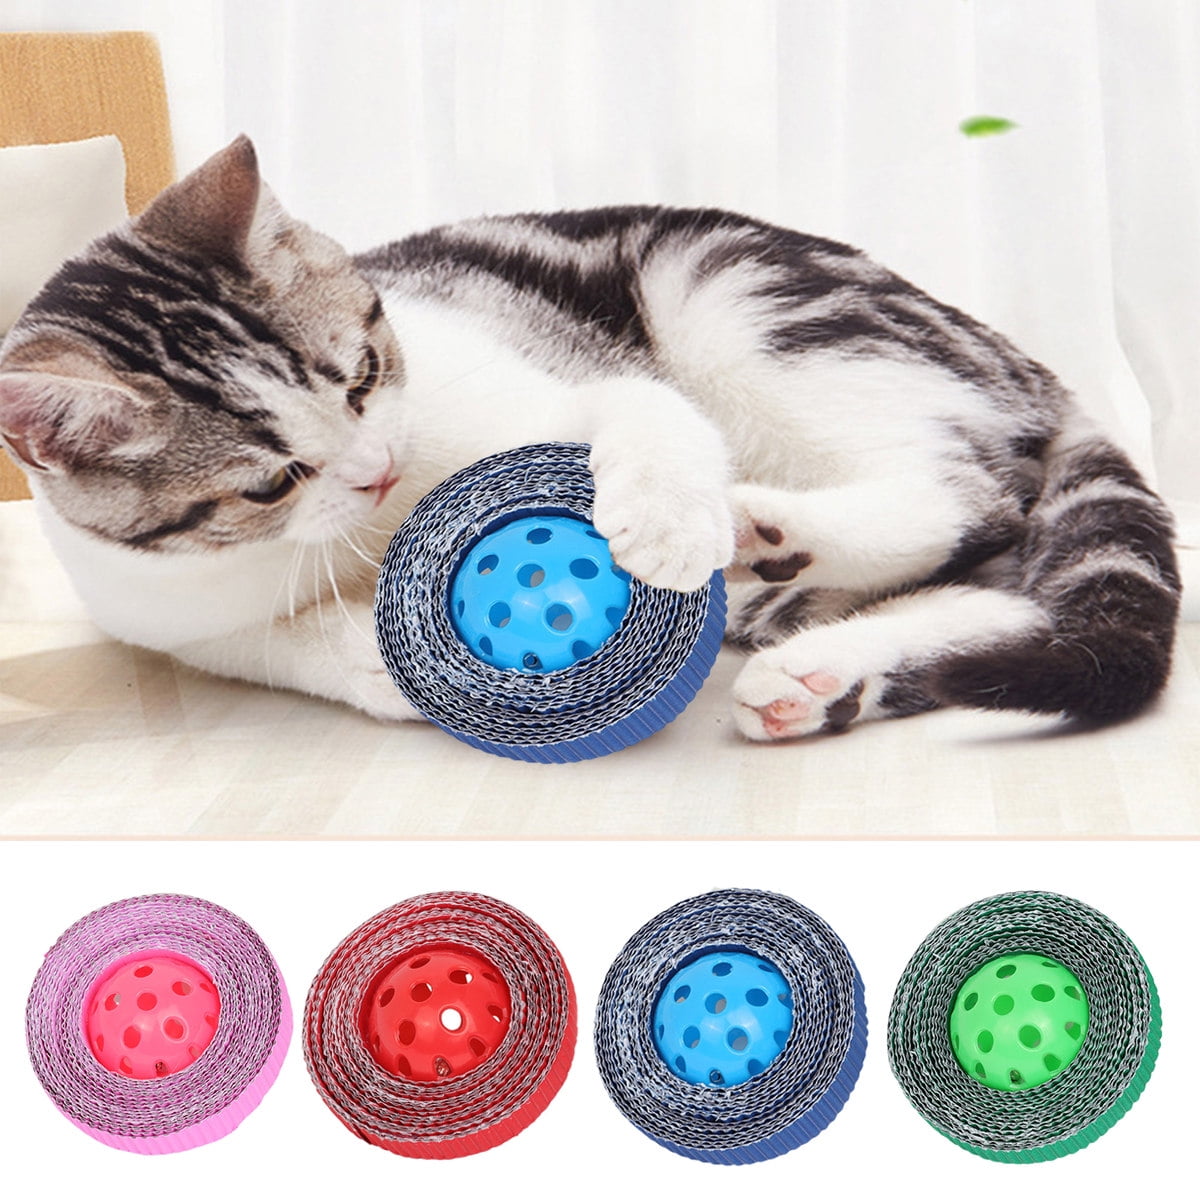 3Pcs Cat Toy Balls Colorful Kitten Toys Soft Cat Balls Interactive for Indoor Cats Dogs for Pet Plush Scratch Chew